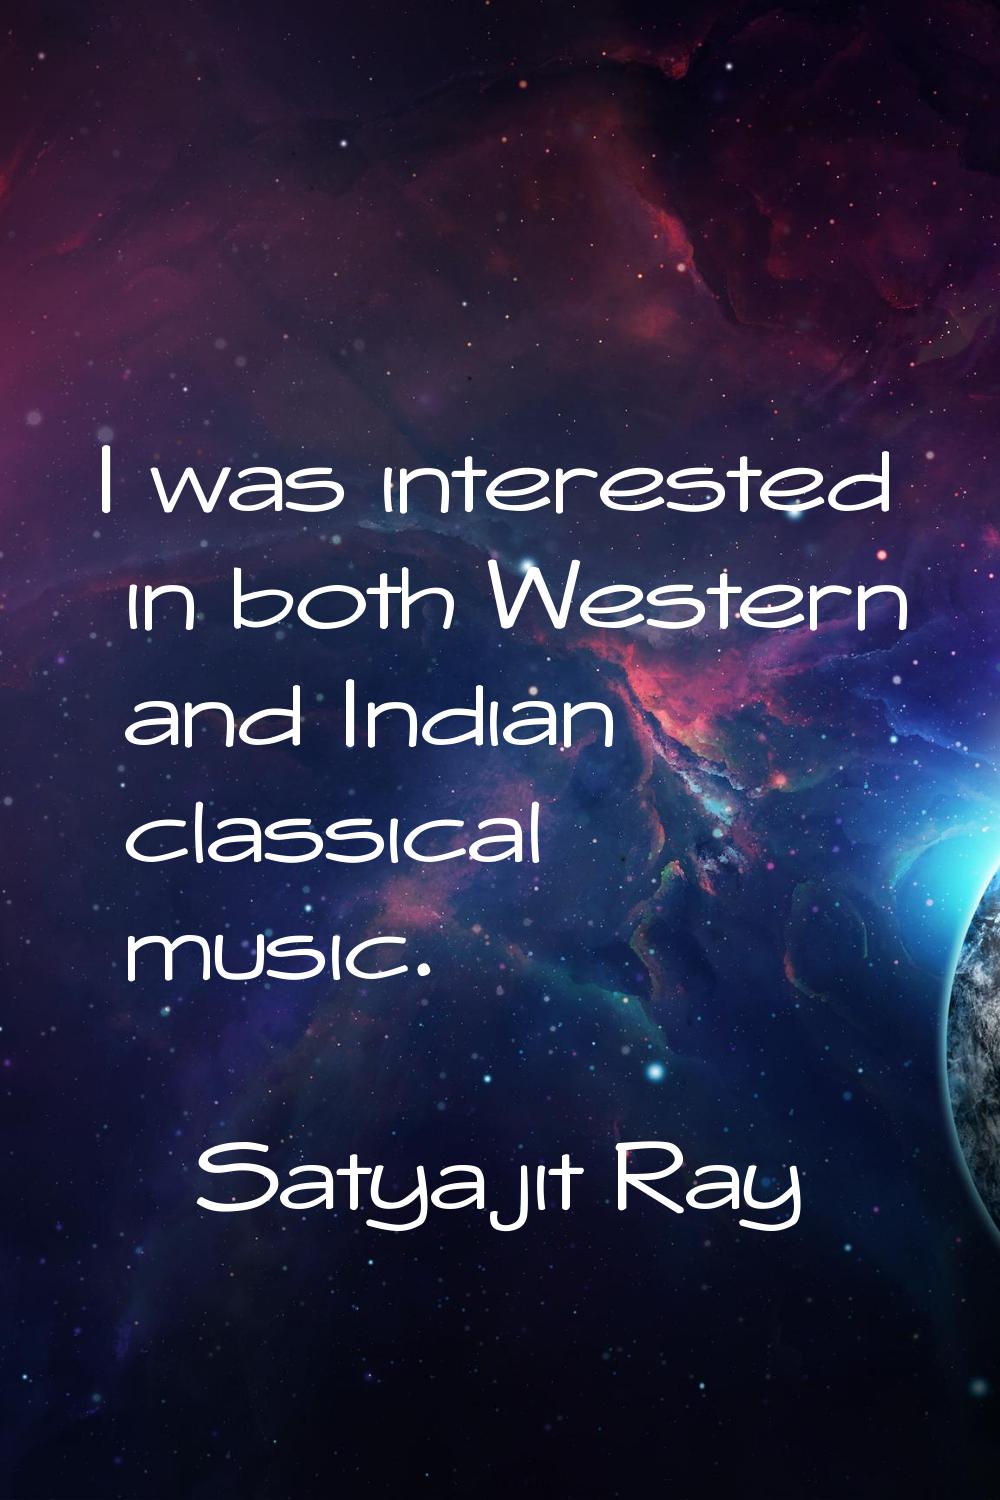 I was interested in both Western and Indian classical music.